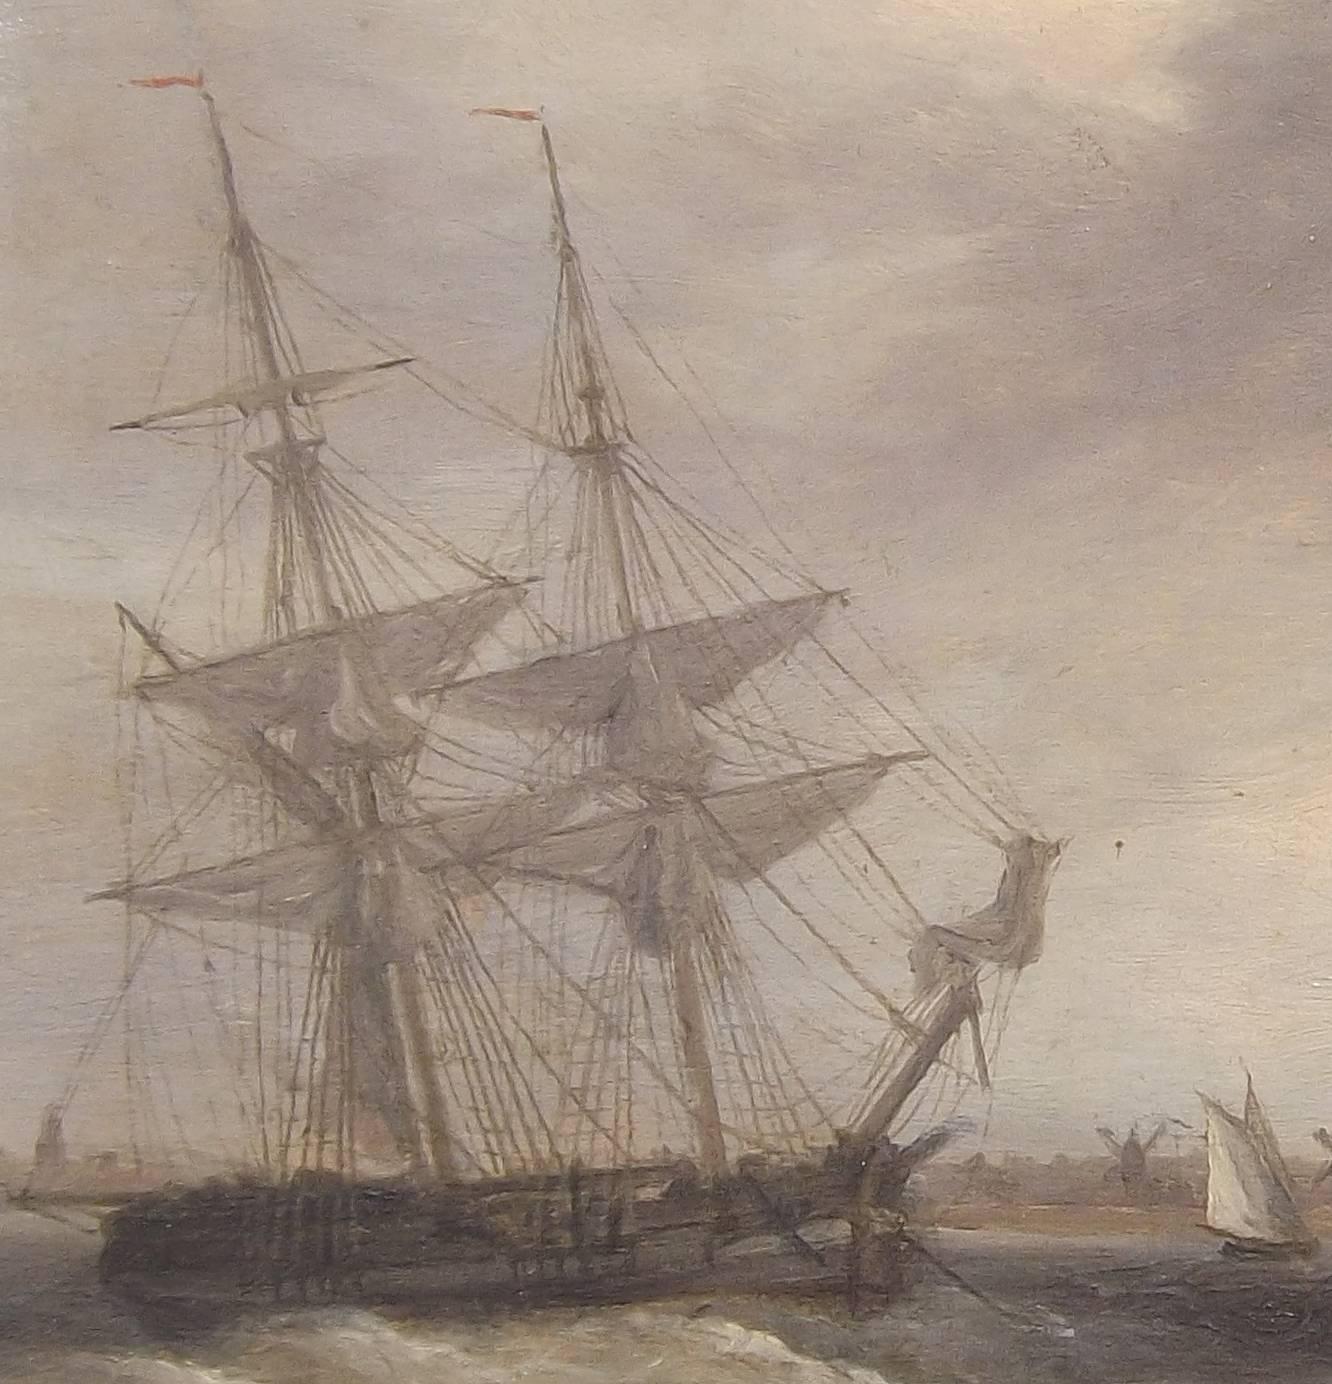 English Original Oil Painting of Fishing Boats on Rough Seas by Thomas Luny Dated 1832